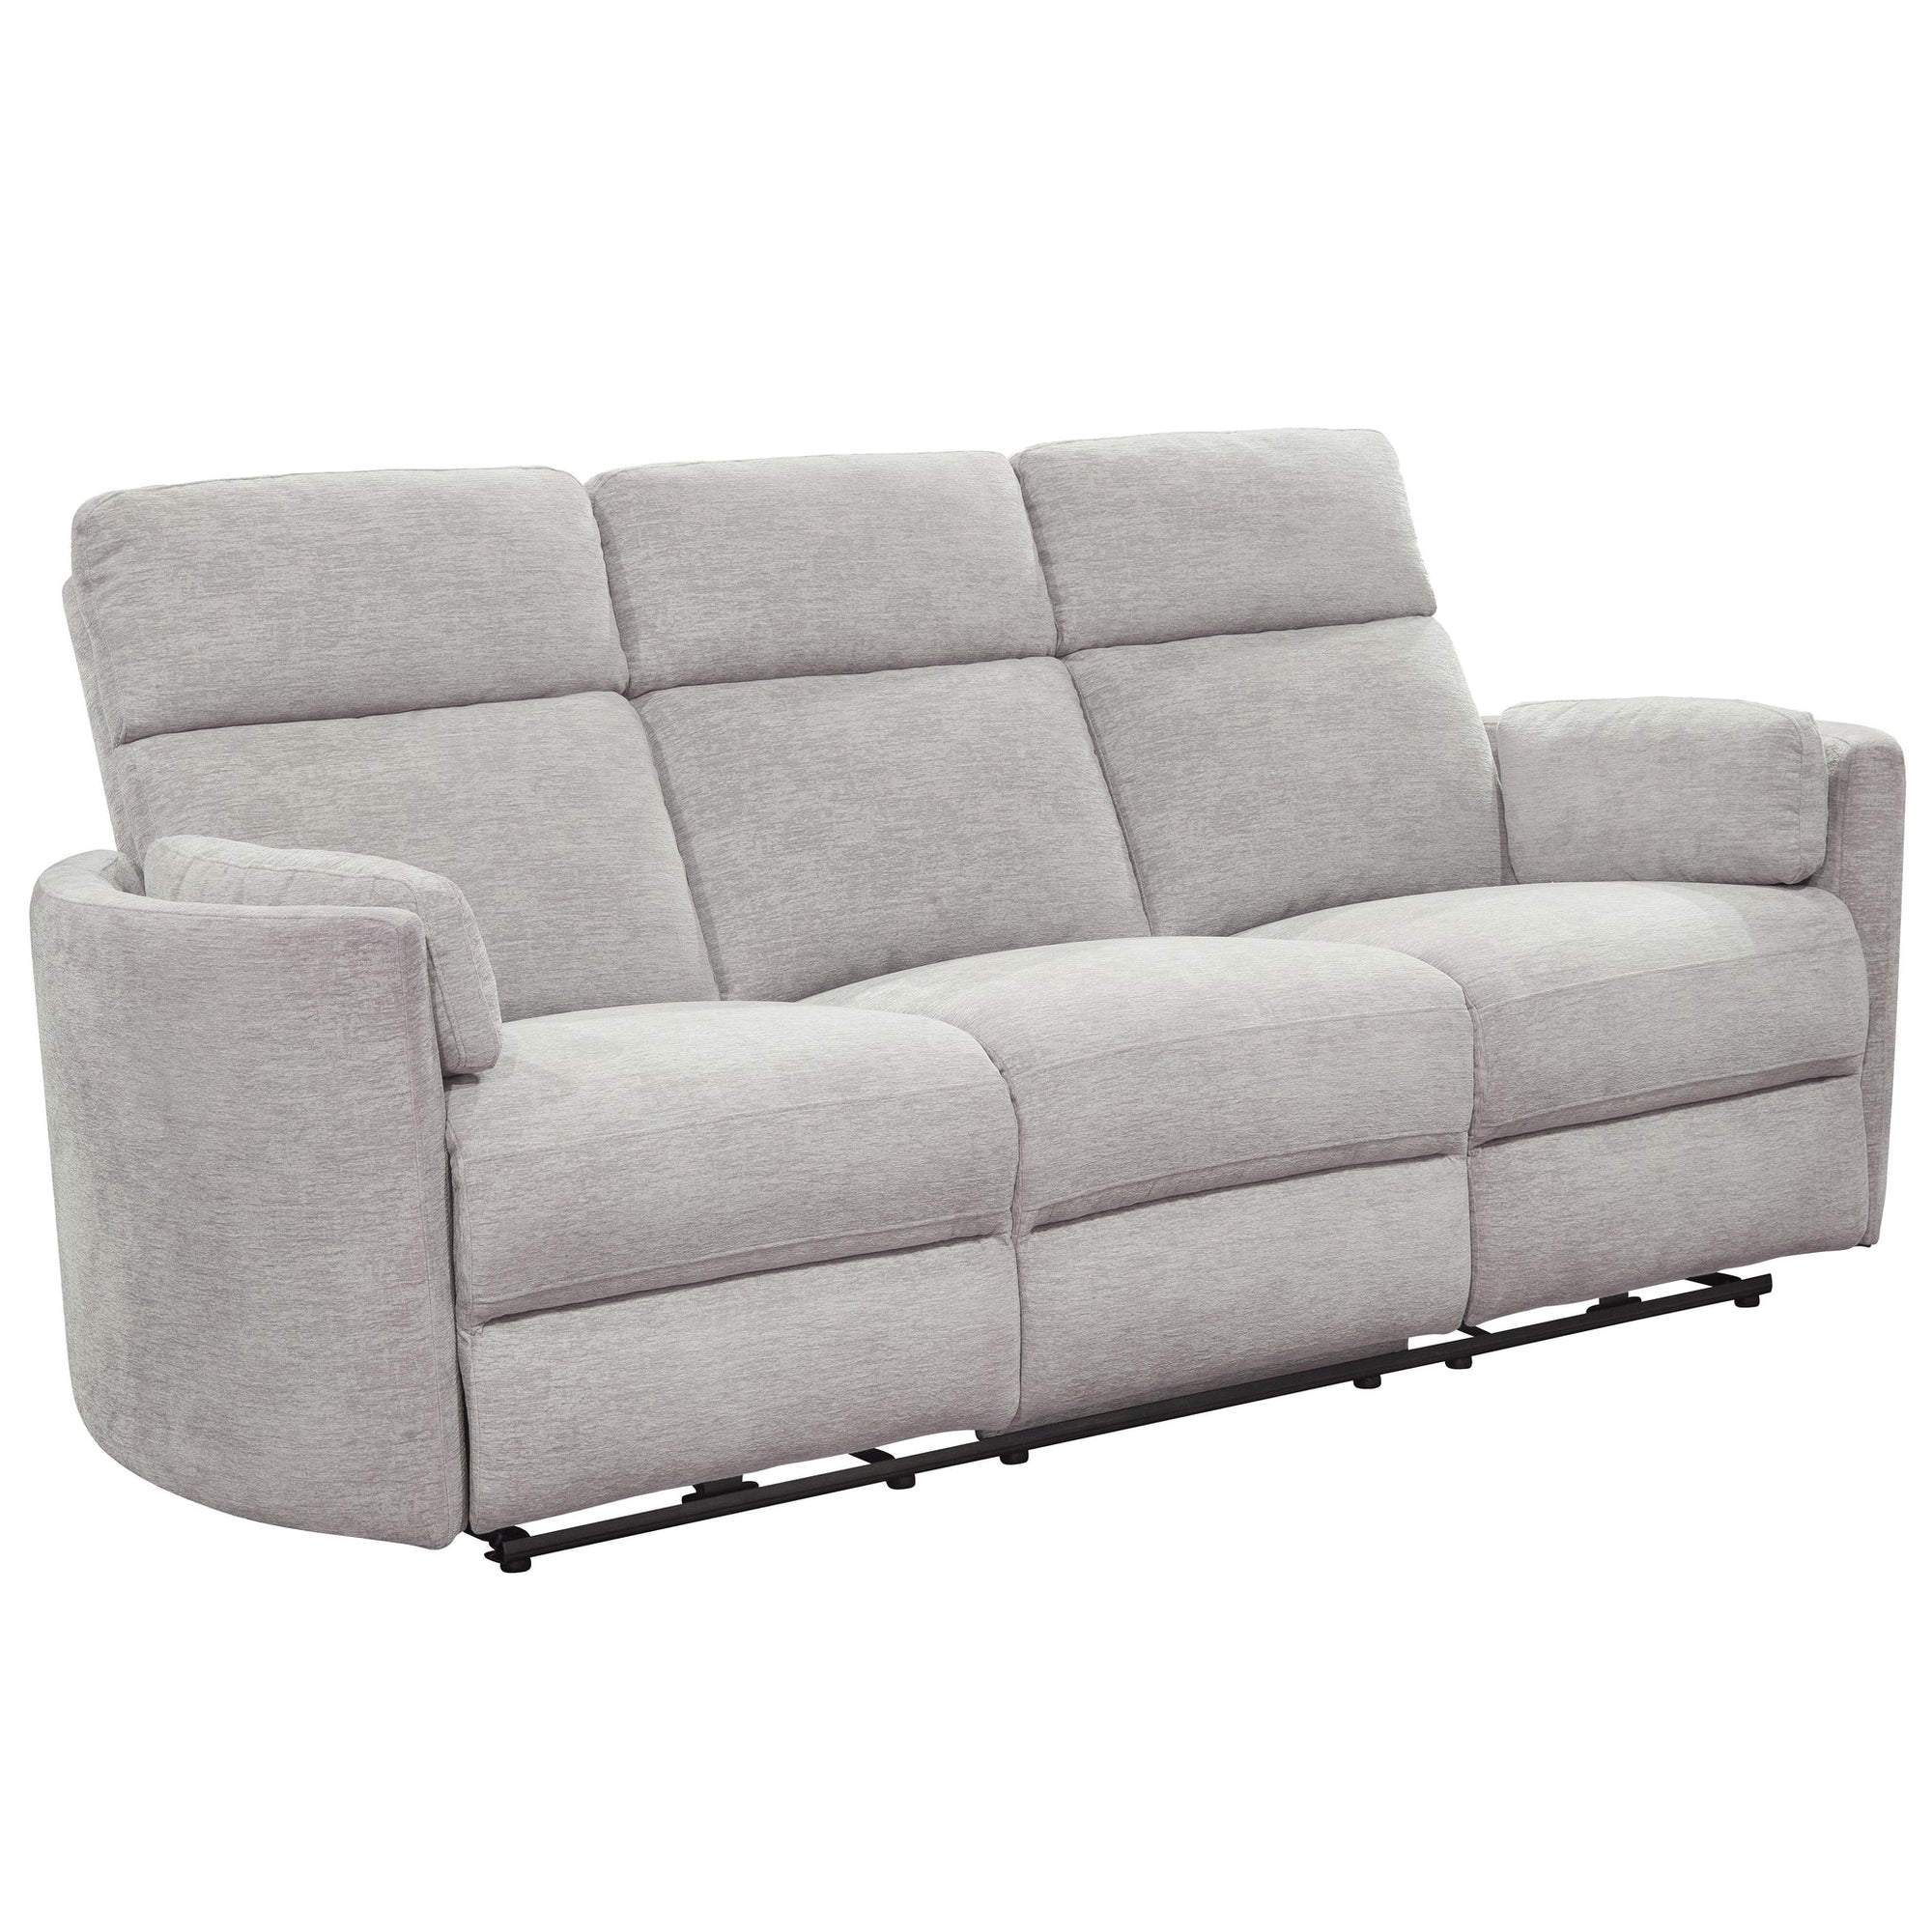 Radius Power Sofa in Mineral by Parker House